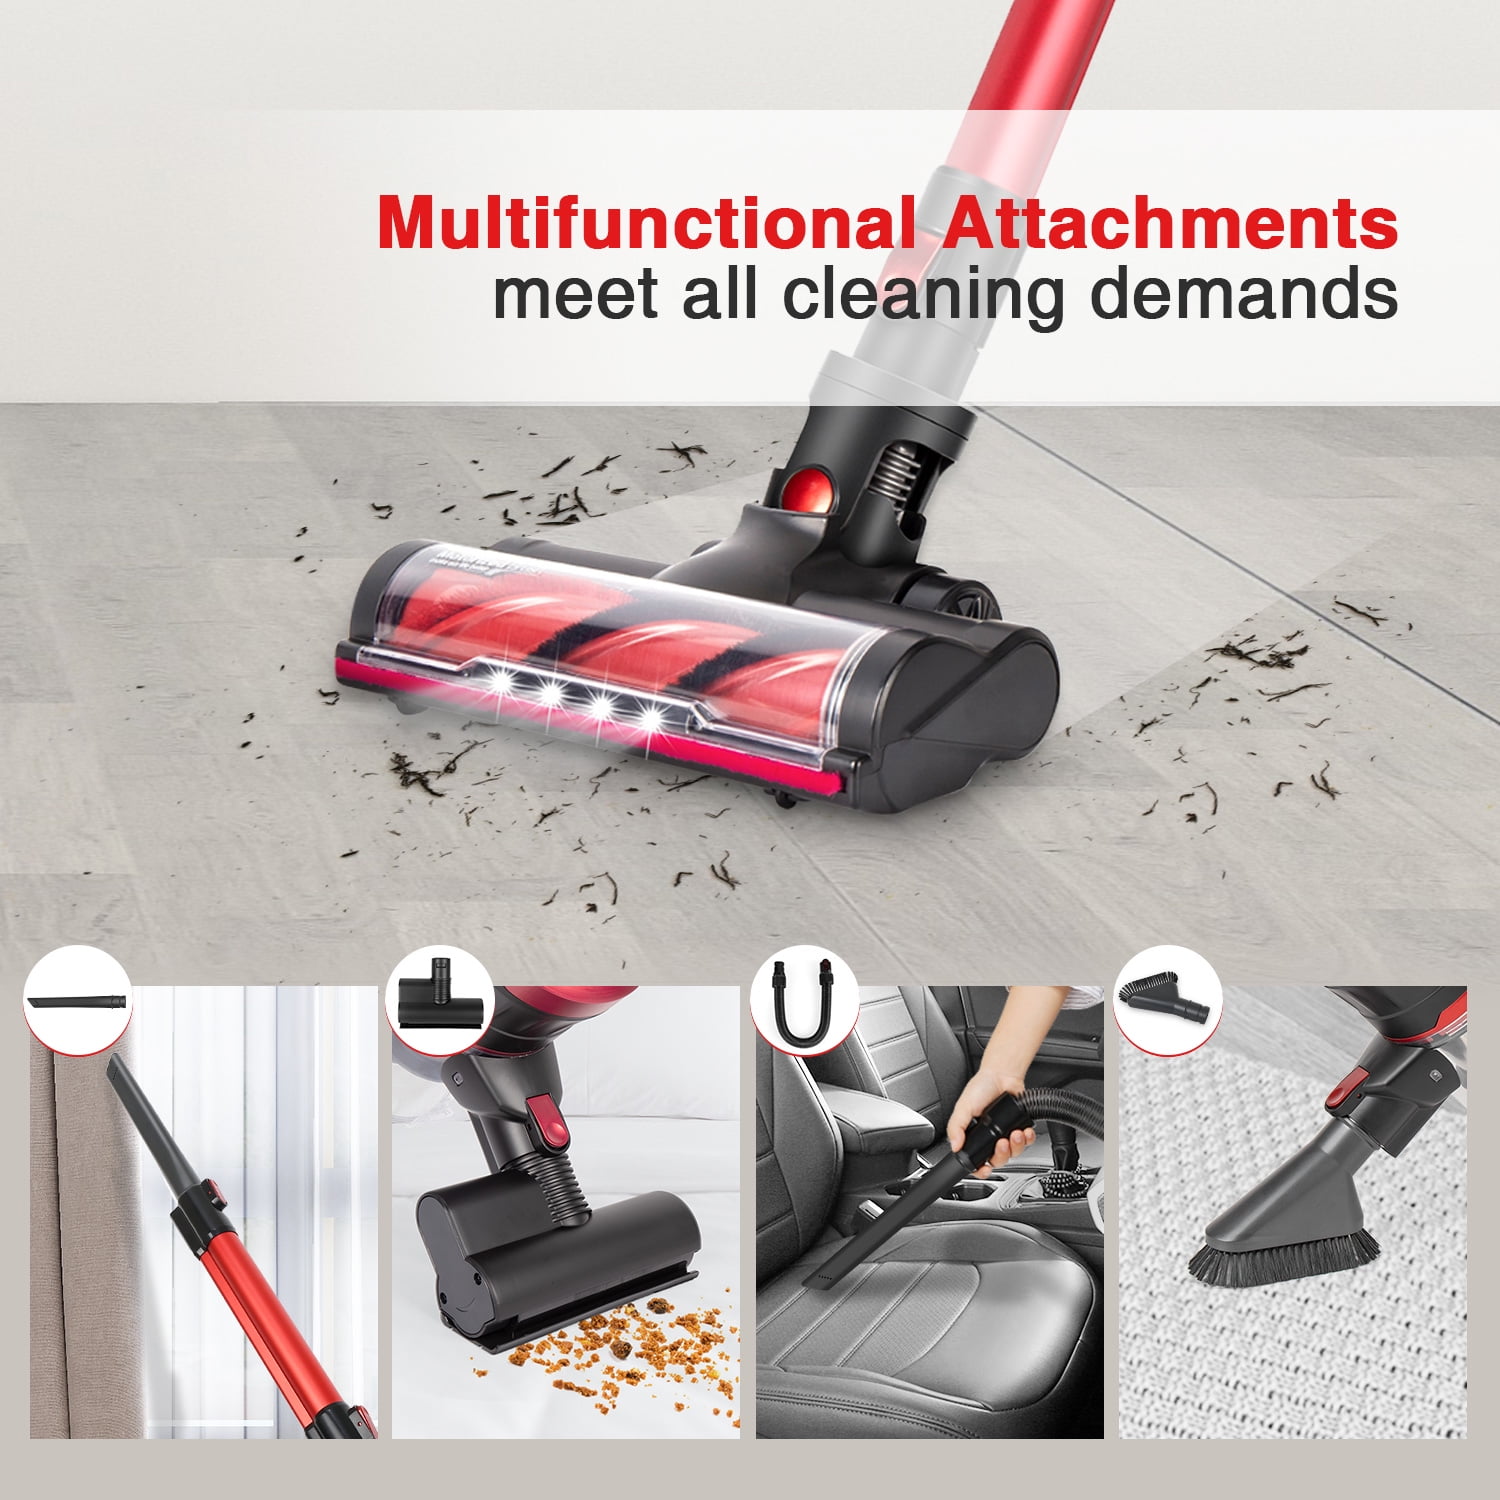 MOOSOO Cordless Vacuum 23Kpa Quiet Yet Powerful, Lightweight Stick Vacuum Cleaner with Rich Accessories, K17 - image 4 of 9